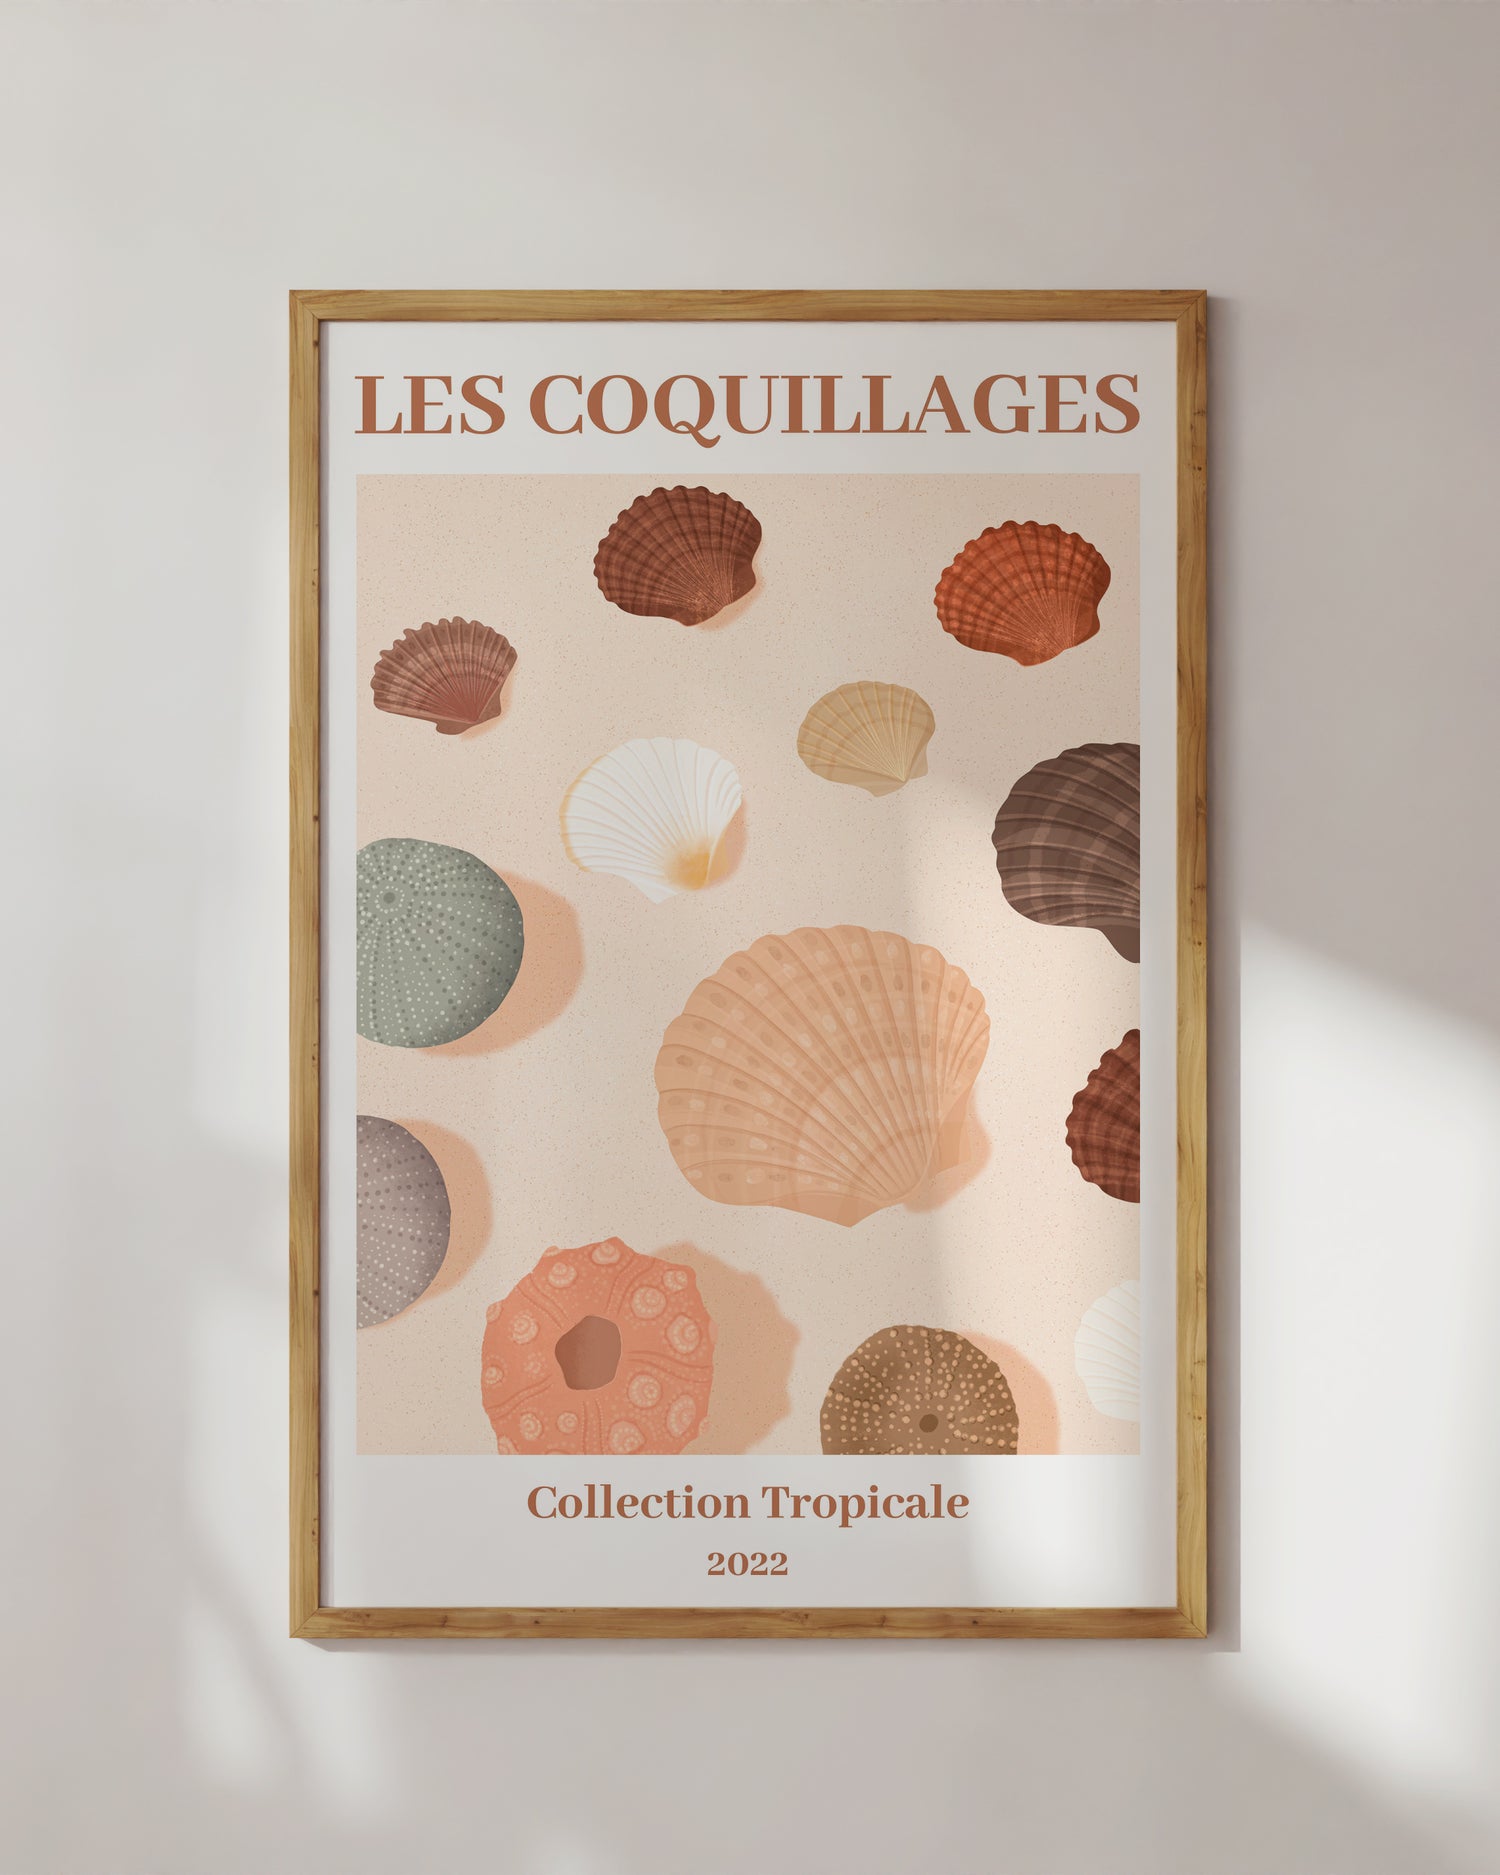 Les Coquillages